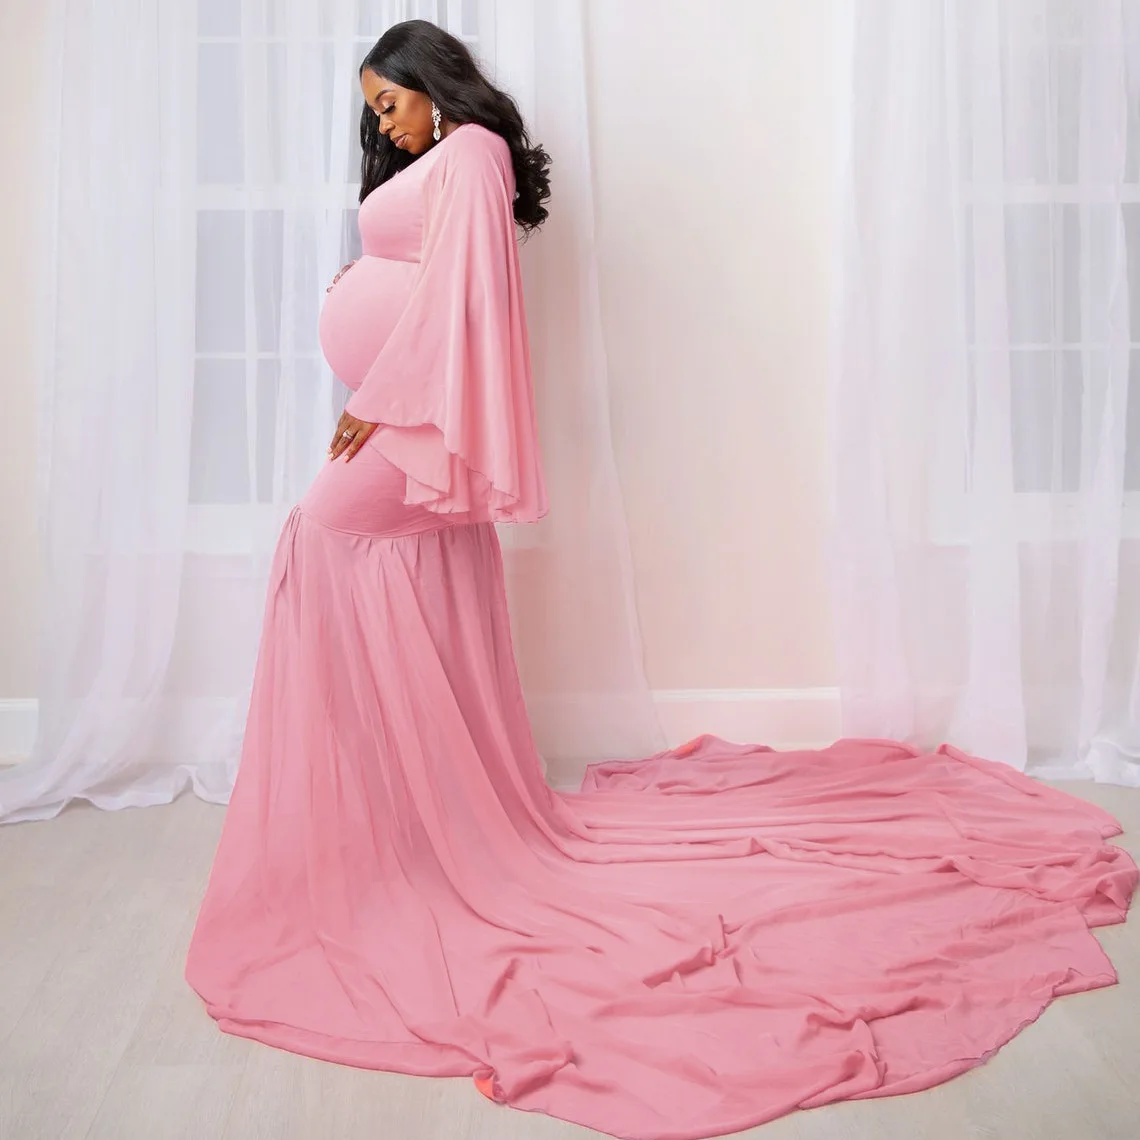 Maternity Dresses for Photo Shoot  Pregnancy  Baby Shower V-neck Long Sleeve Loose Extended Skirt Tail Sleeved Chiffon  Pink